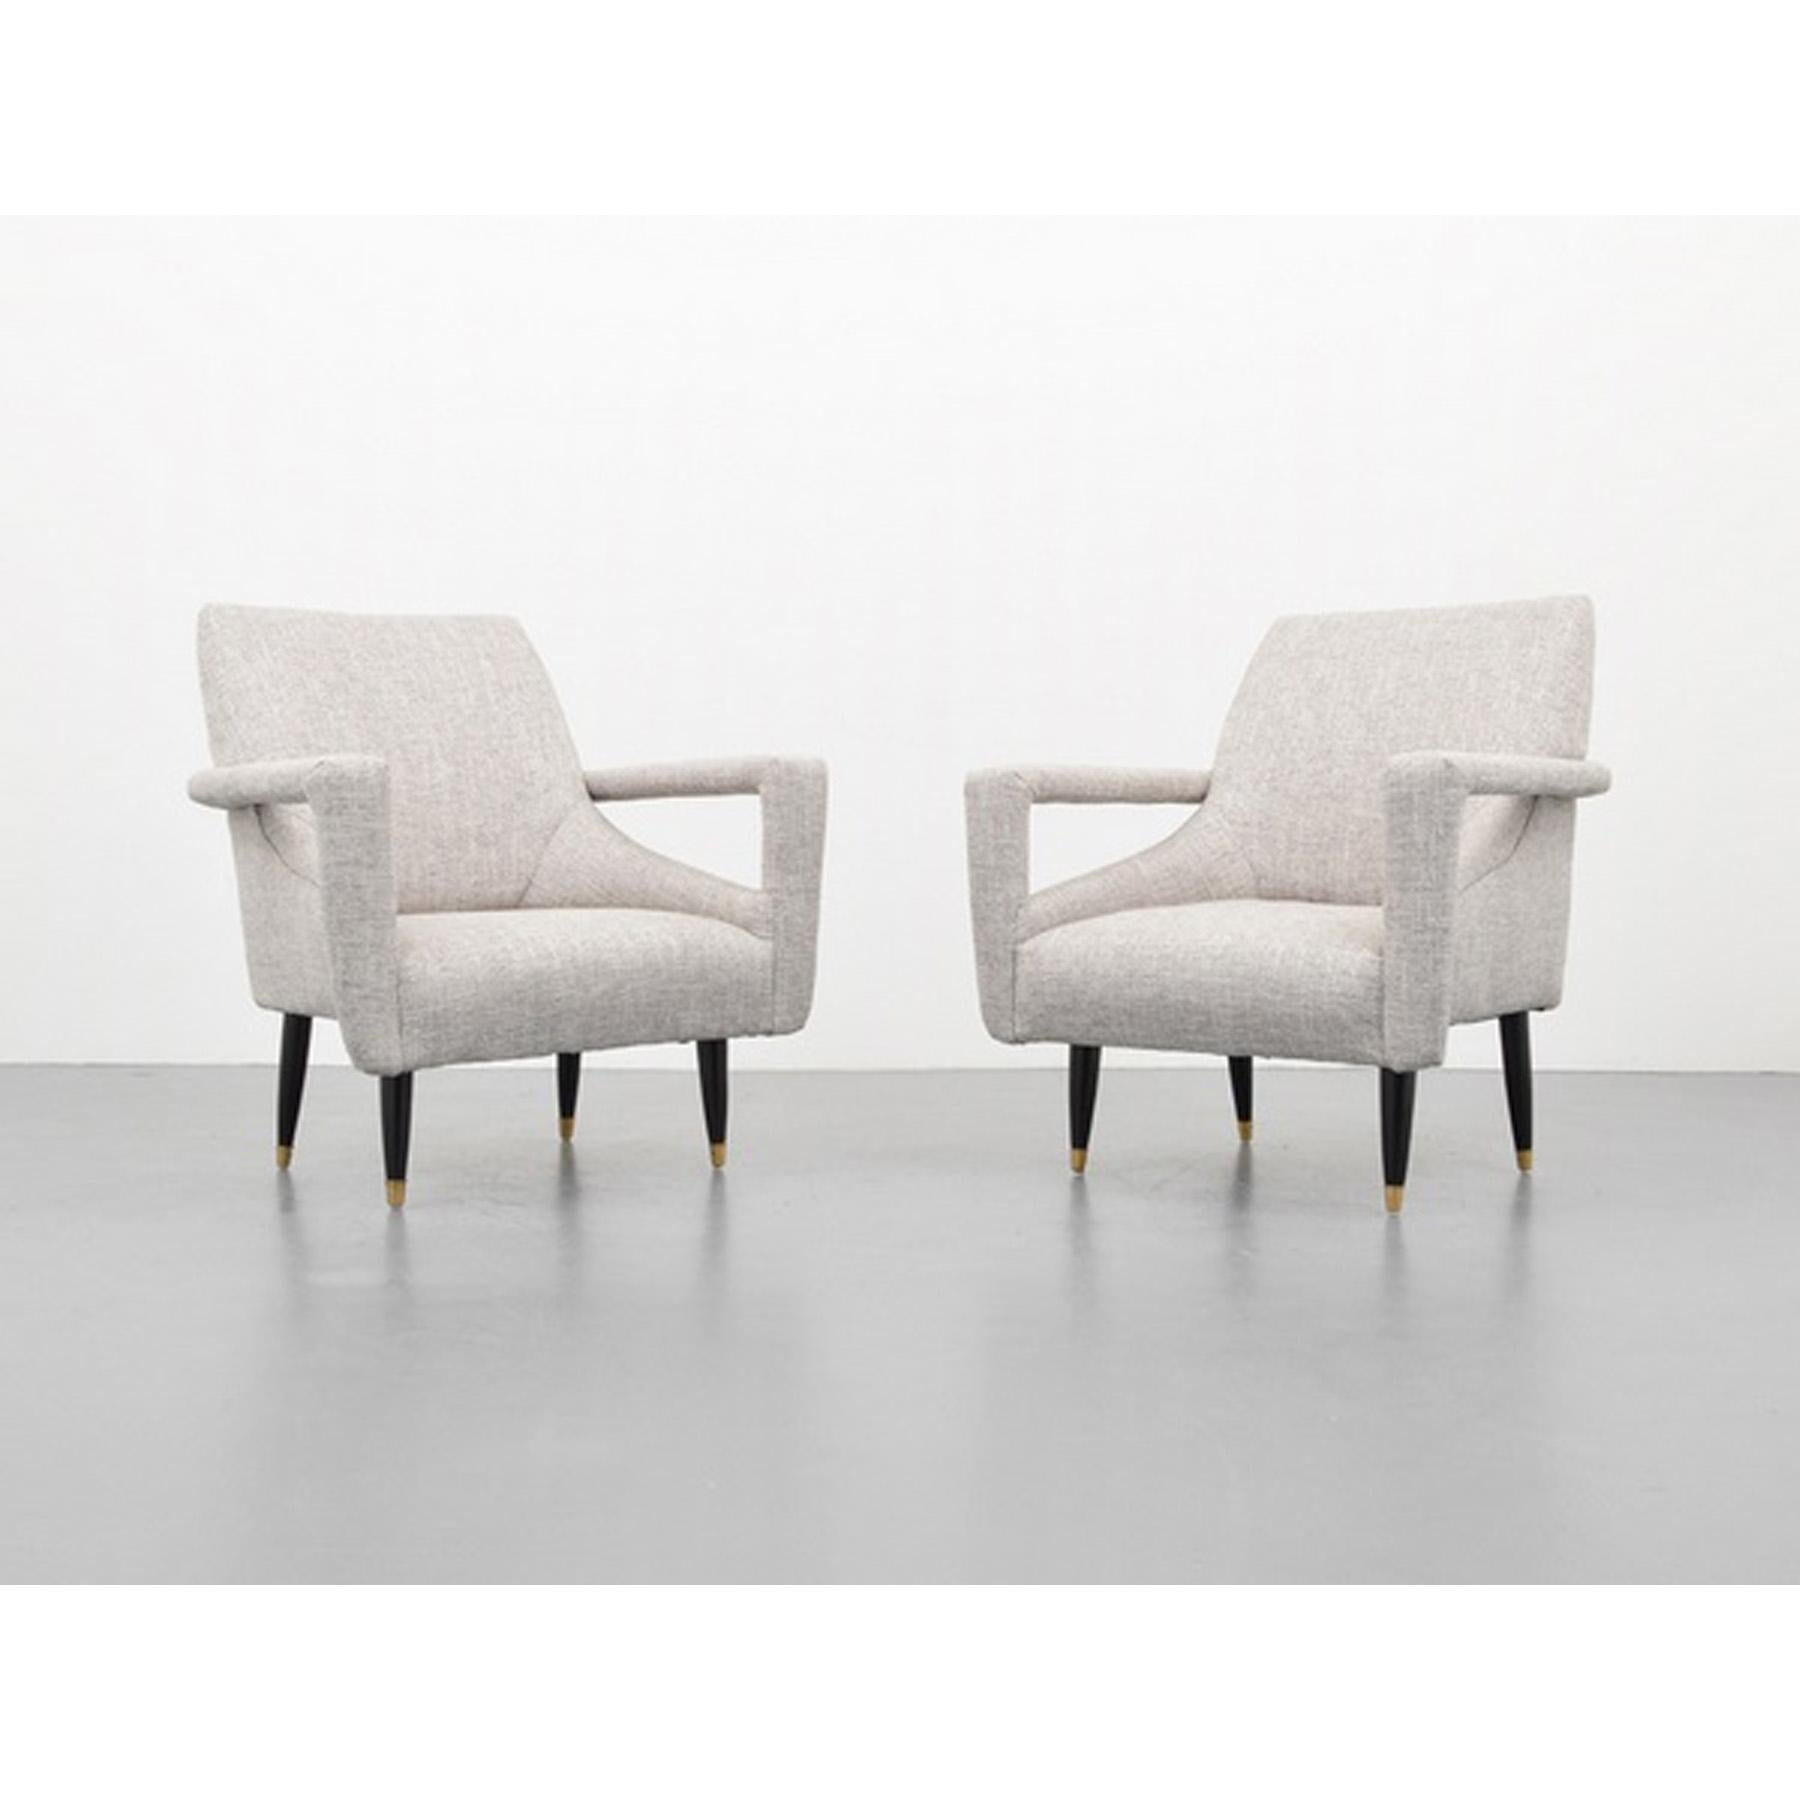 A pair of Mid-Century Modern lounge chairs in the manner of Italian designer Ico Parisi. Upholstered in a light gray fabric, with black wooden leg that feature brass detailing, Circa 1960's.